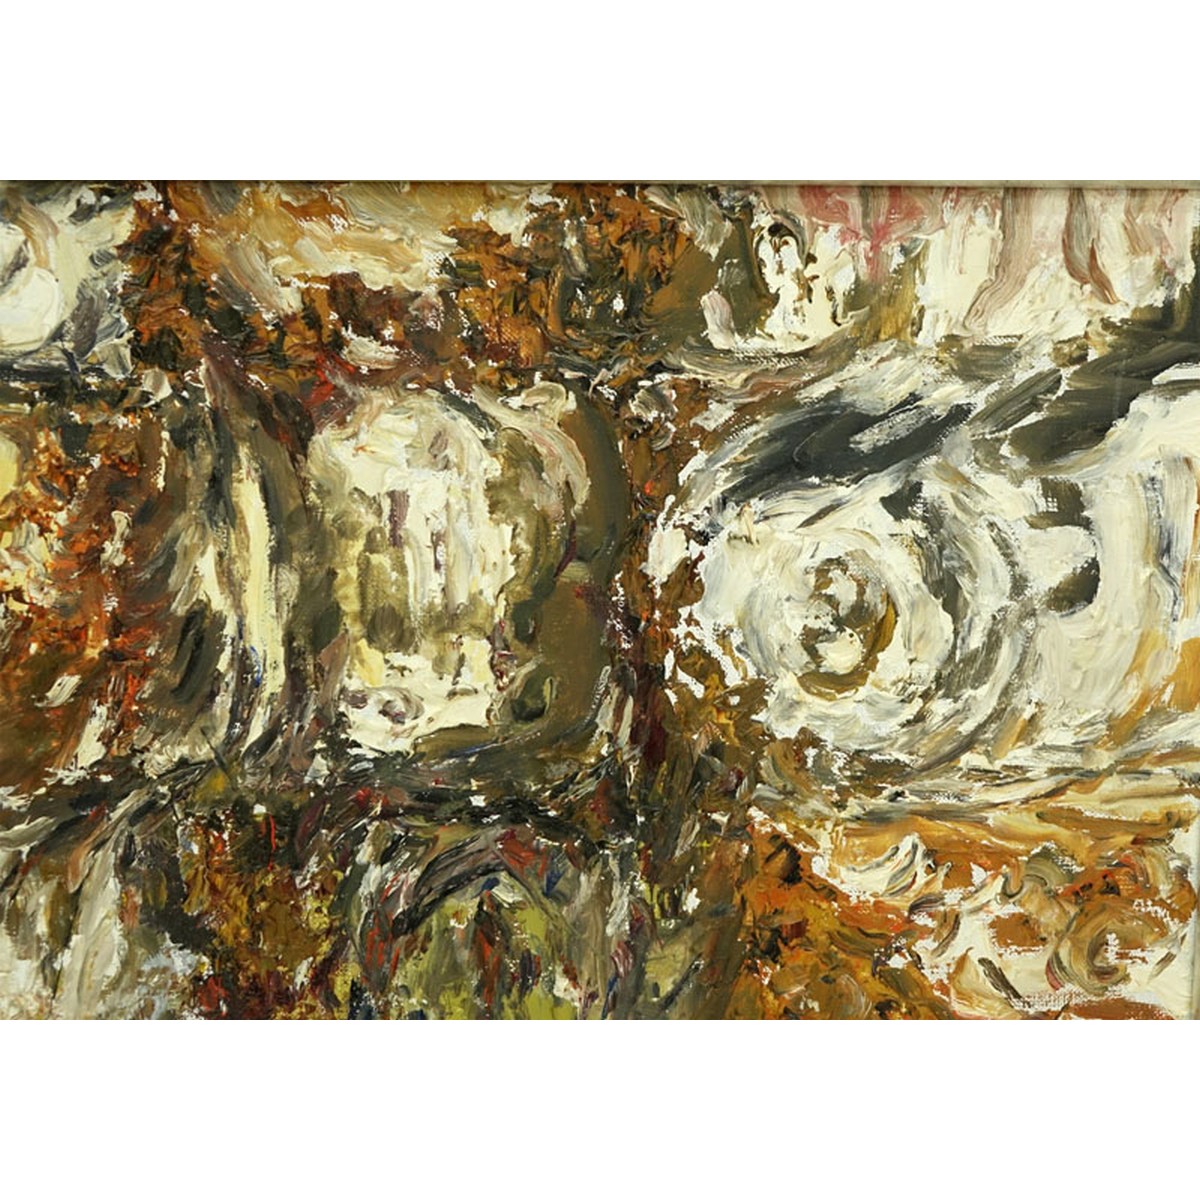 F. Brutsch (20th C.) Oil on Canvas, Abstract Composition, Signed and Dated 1965 Lower Right.